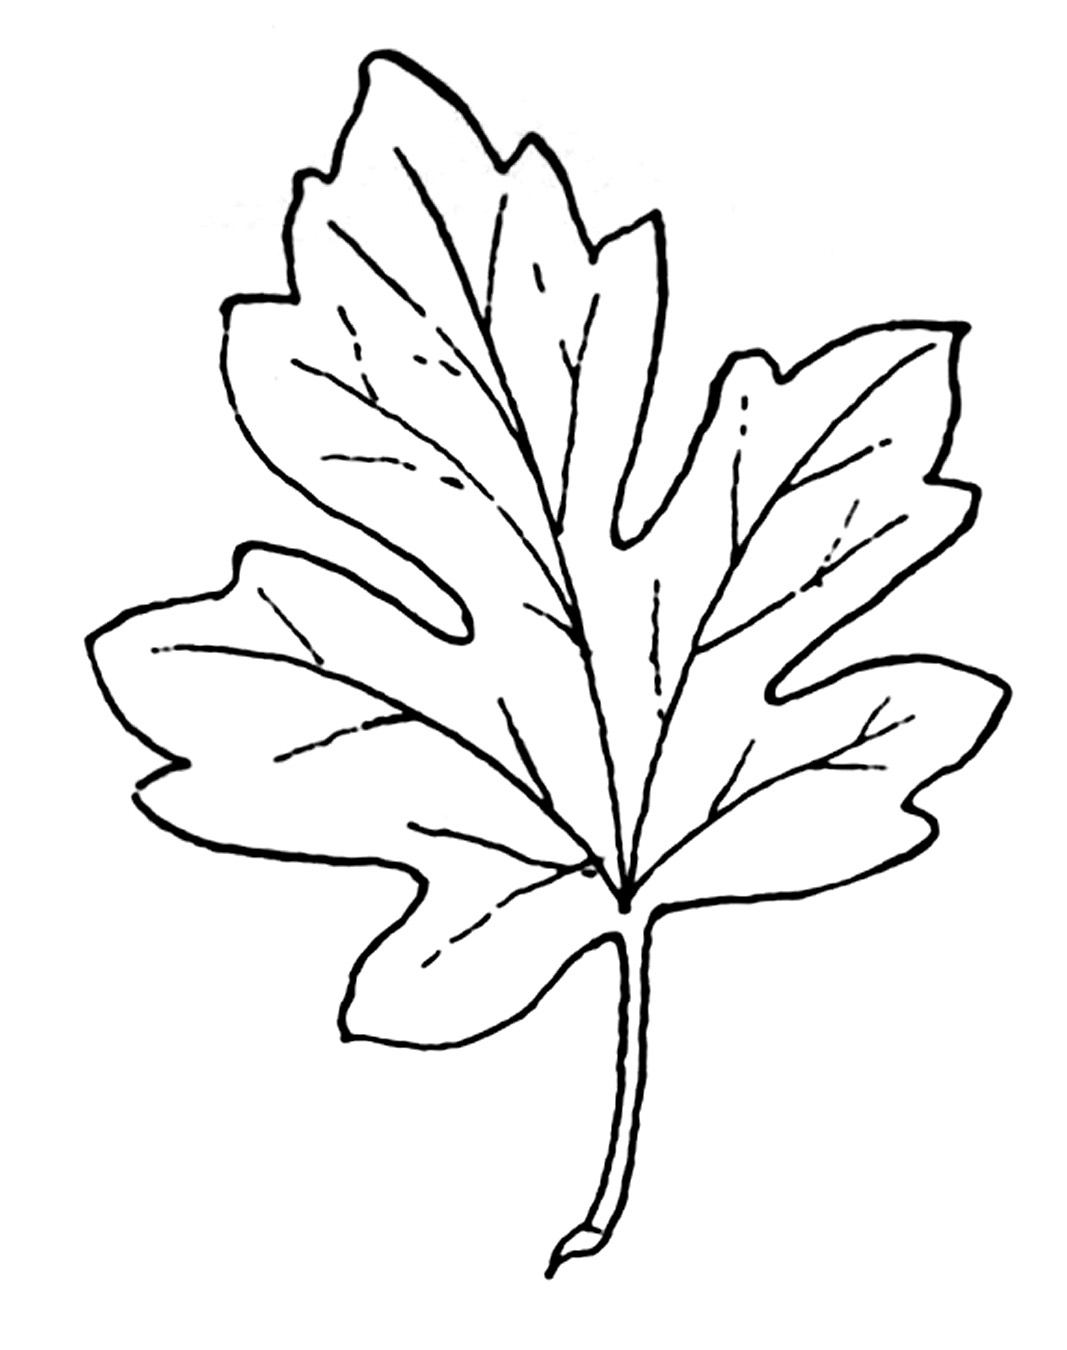 Fall  black and white leaves clipart black and white 2